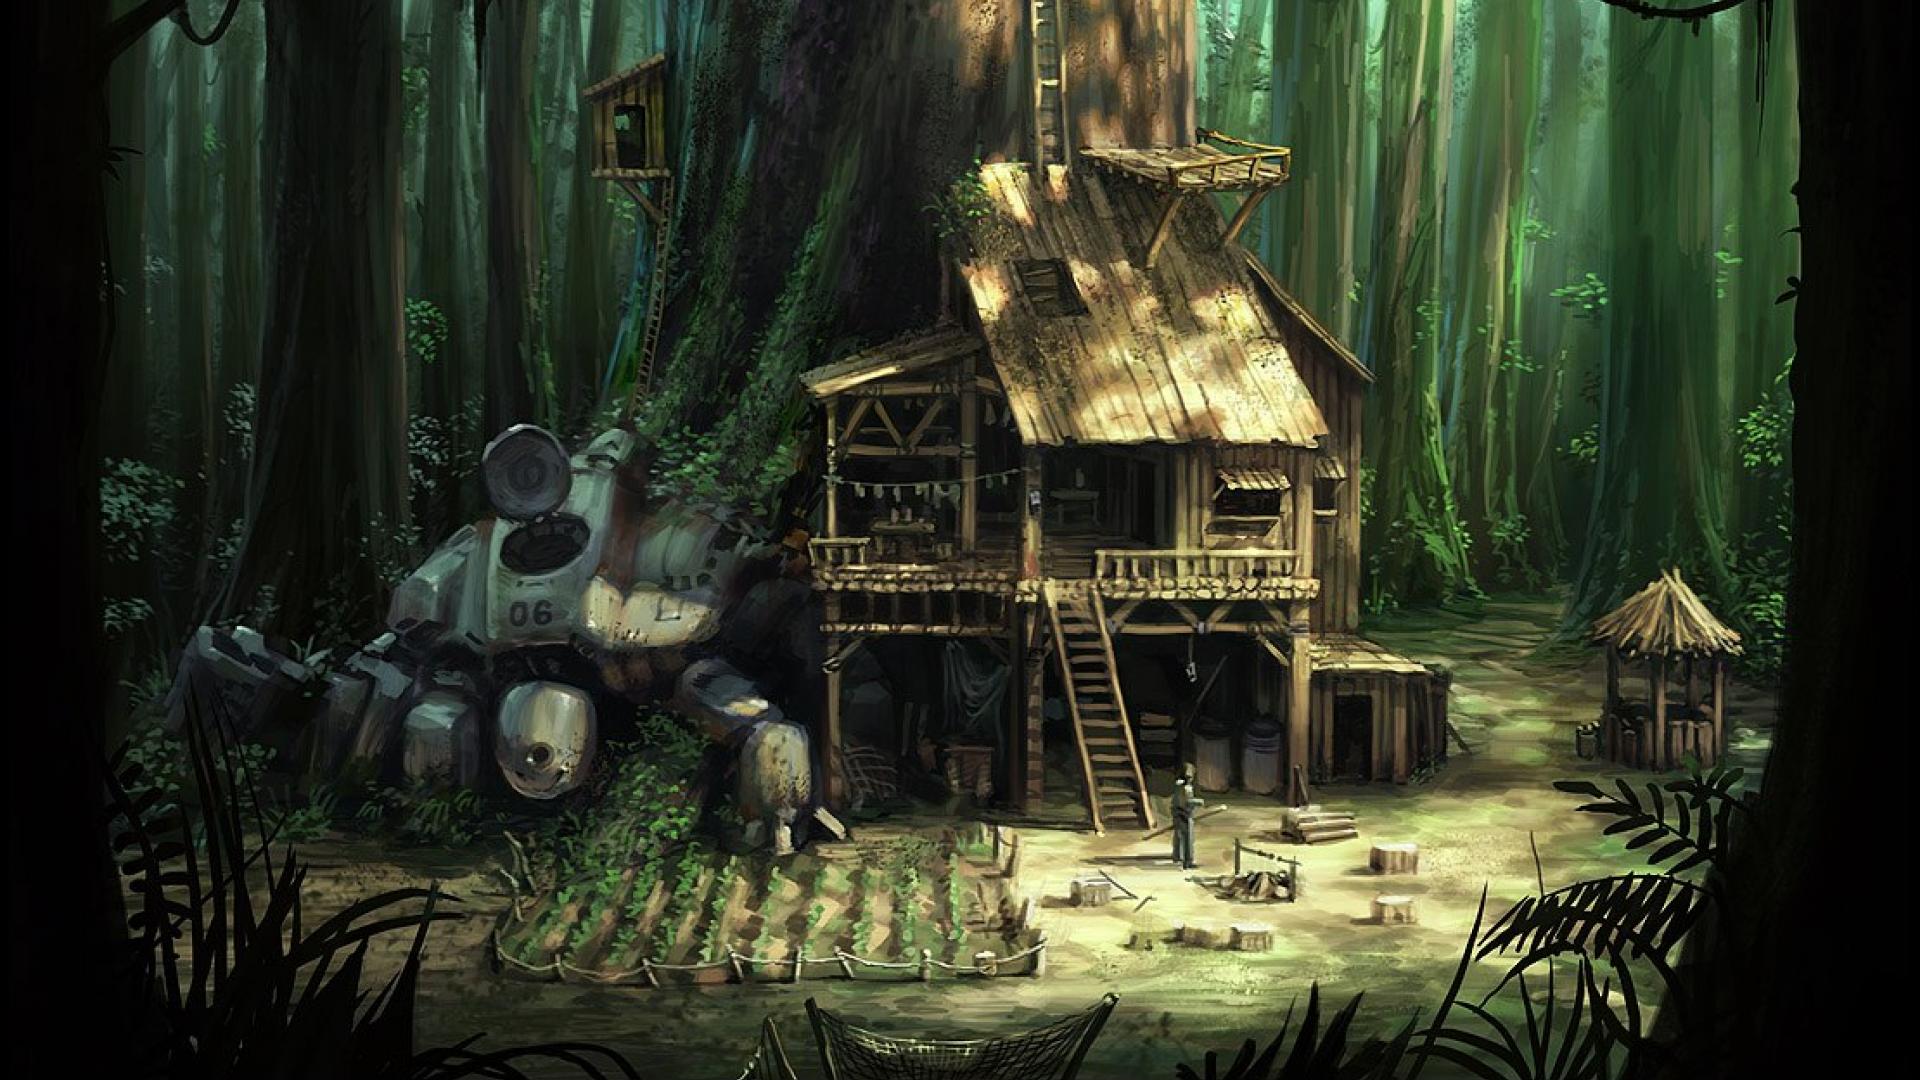 Jungle house signs of the past mech in woods hd wallpaper -